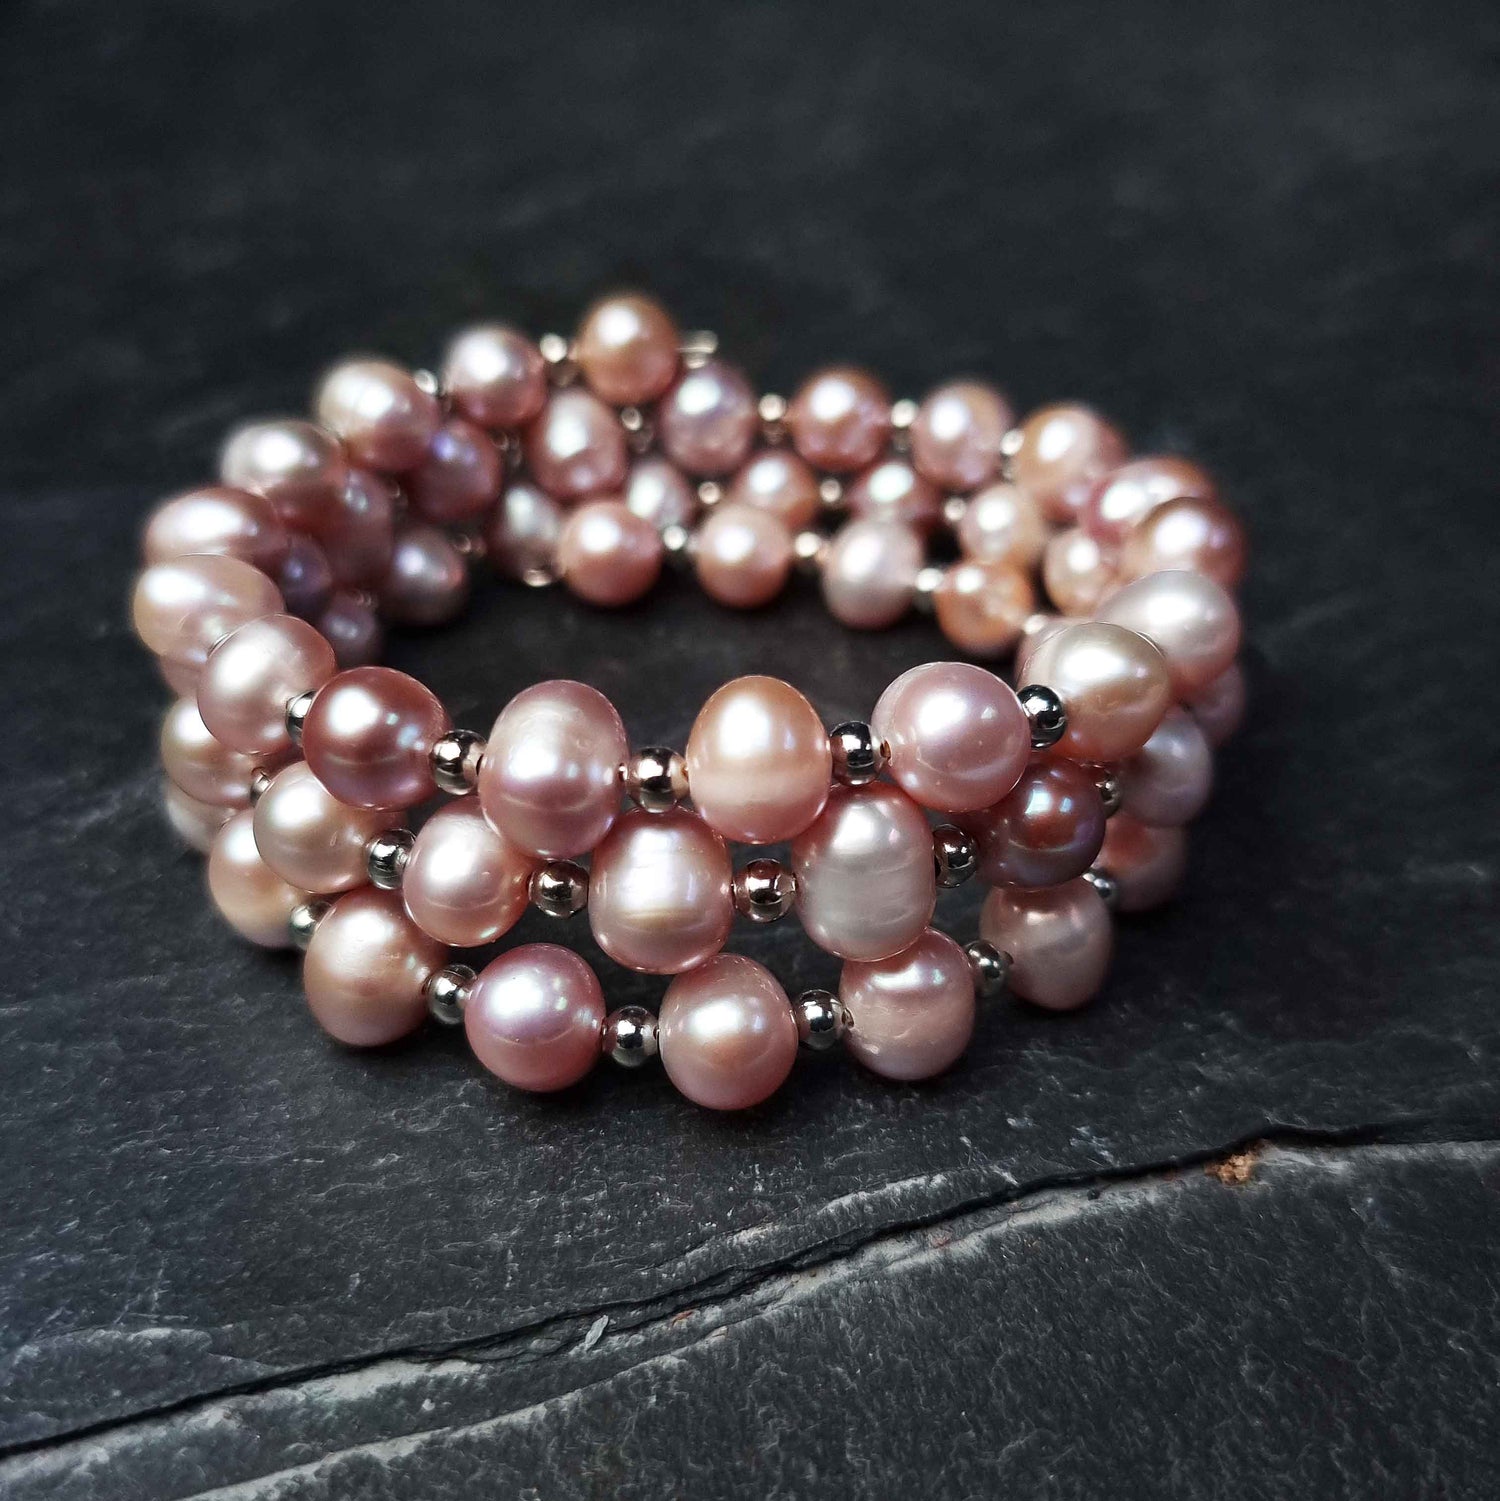 Zoetwater parel armband Pink Pearl Wrap